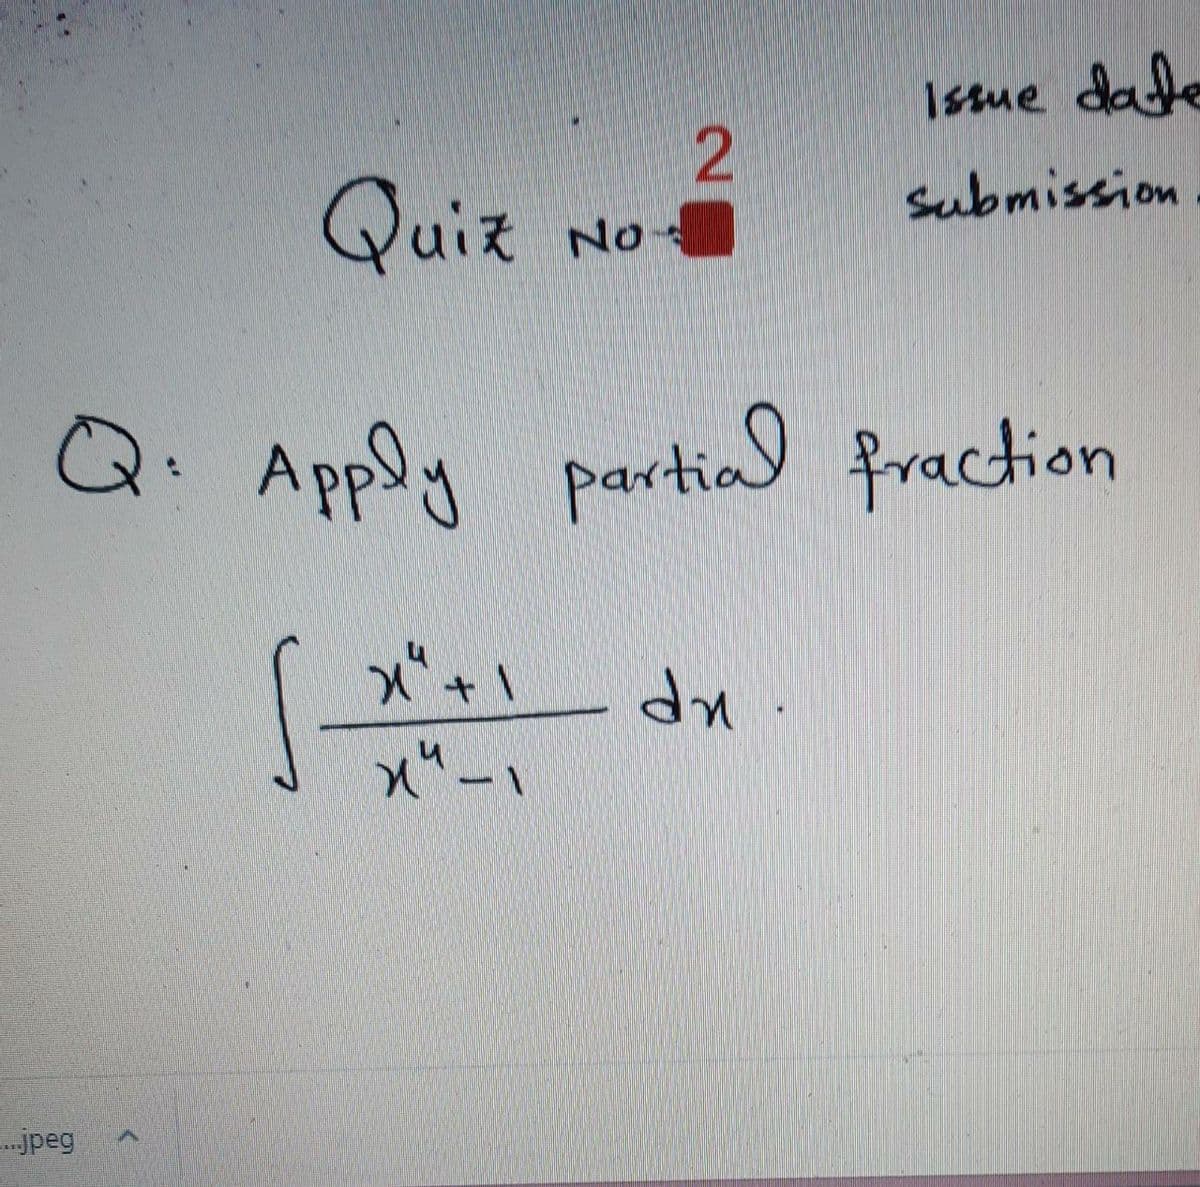 Issue date
Quiz
Submission
No
Q. Apply partial fraction
up
-
-.jpeg
2.
